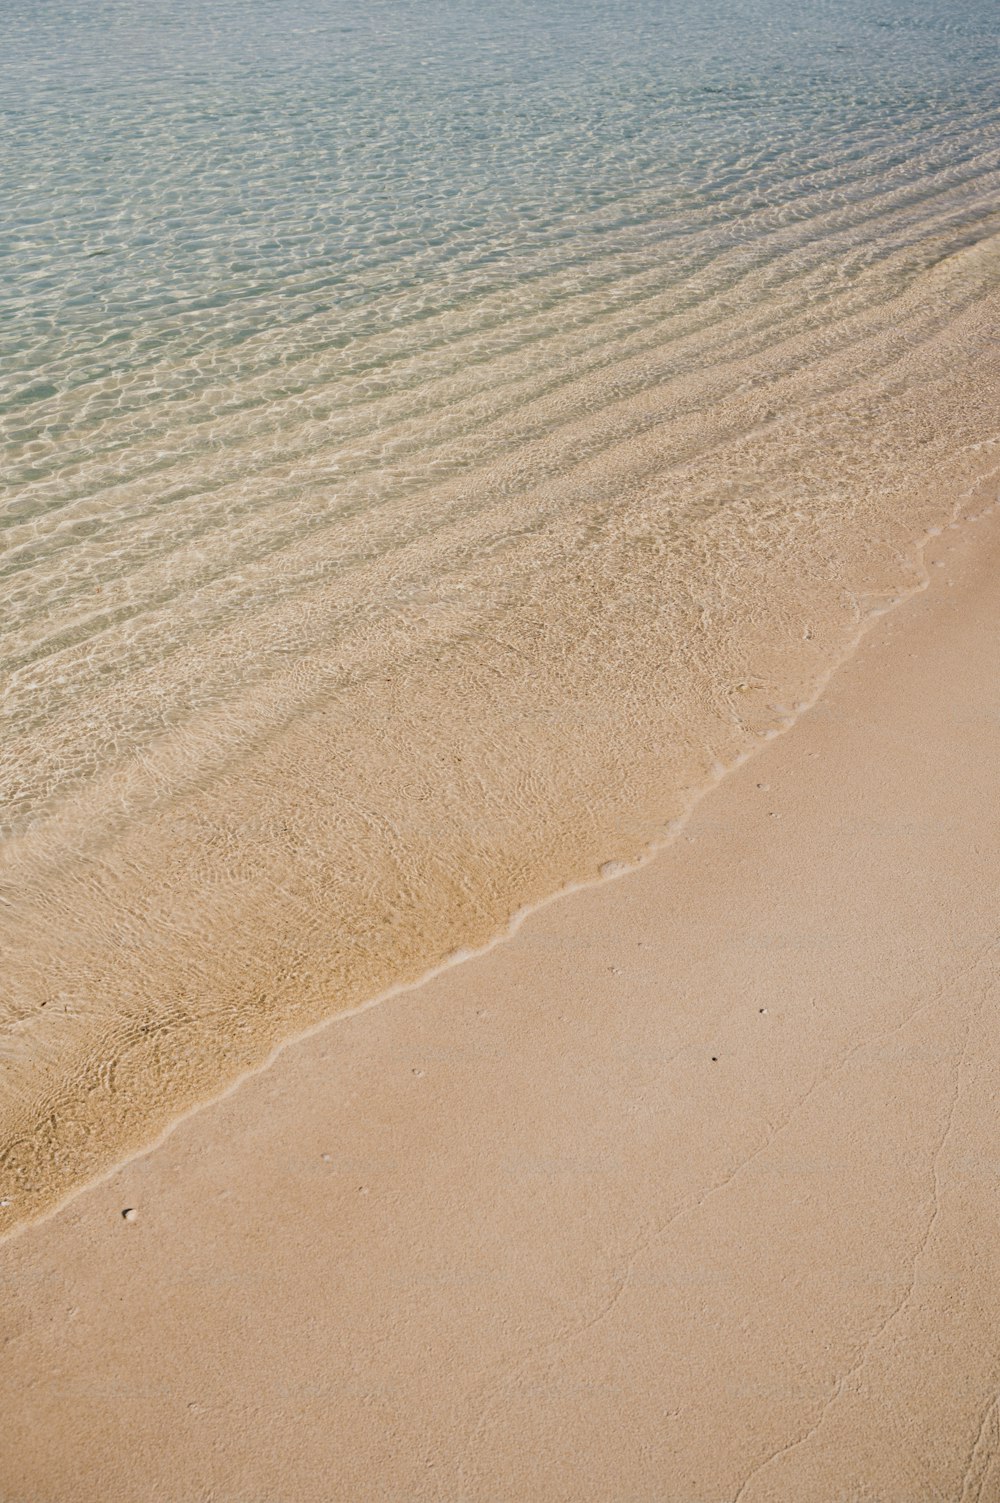 a sandy beach with a body of water in the background